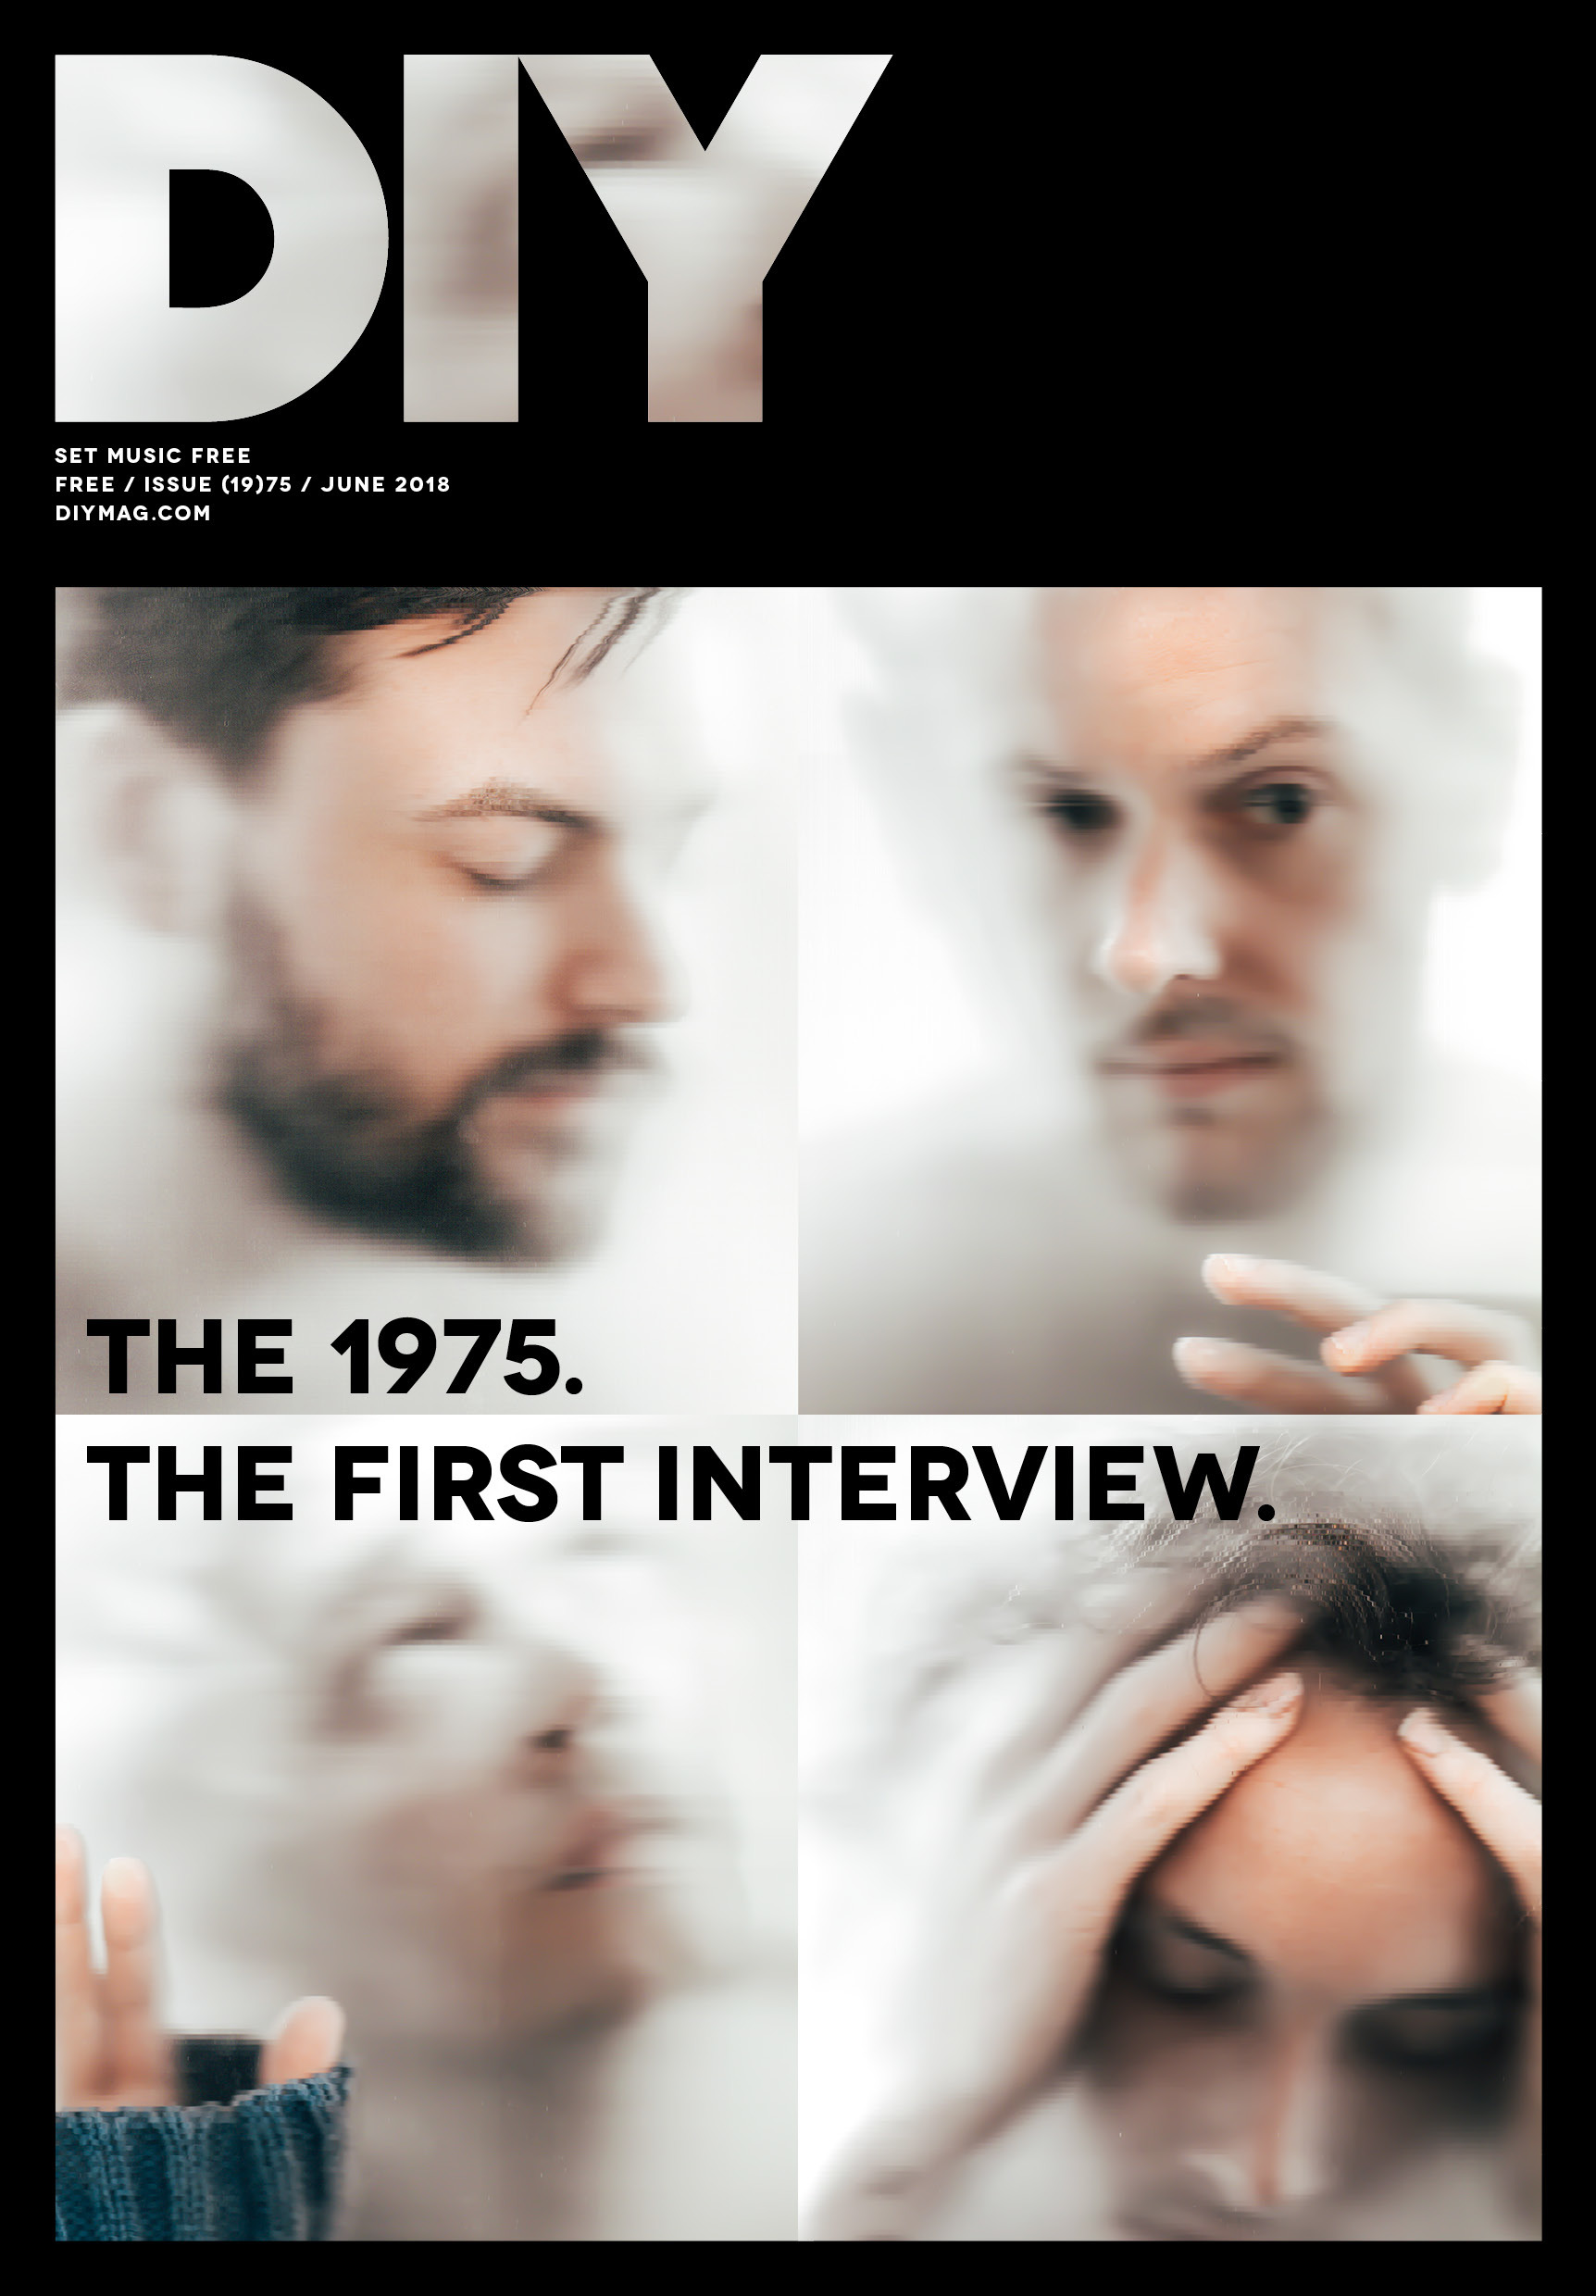 The 1975 are on the cover of the new issue of DIY!